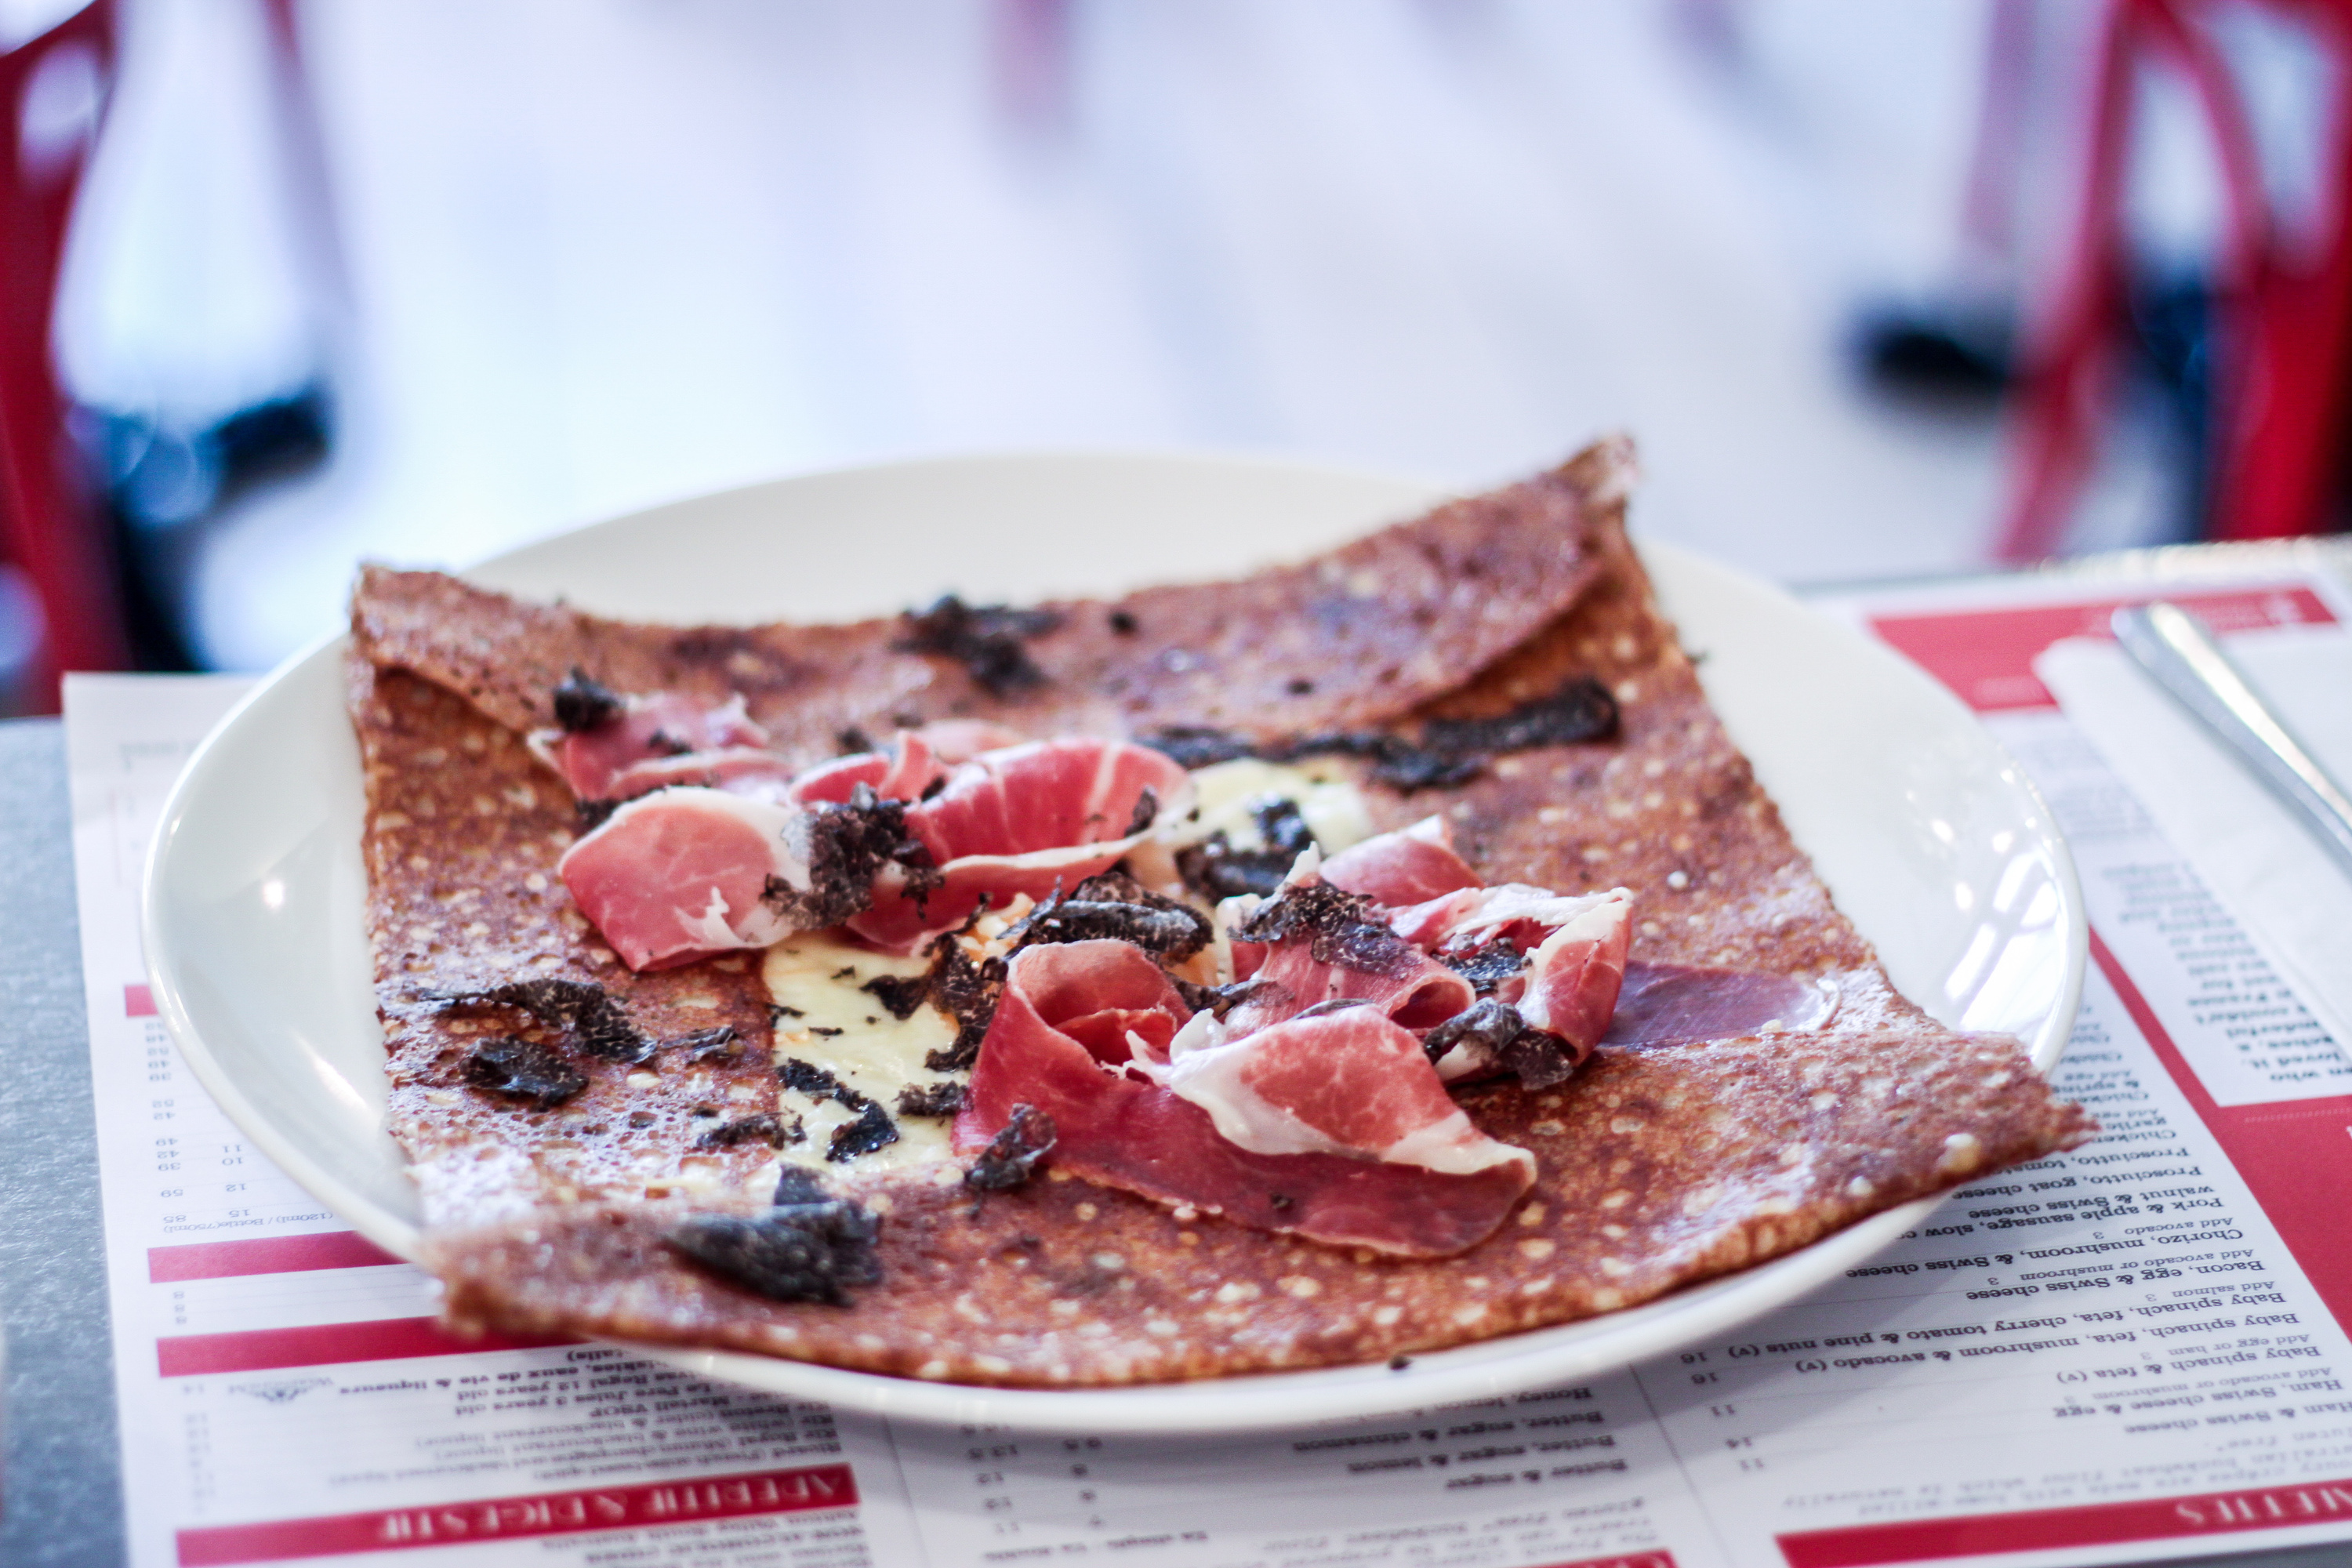 Eat truffle crêpes made by French chefs this Bastille Day